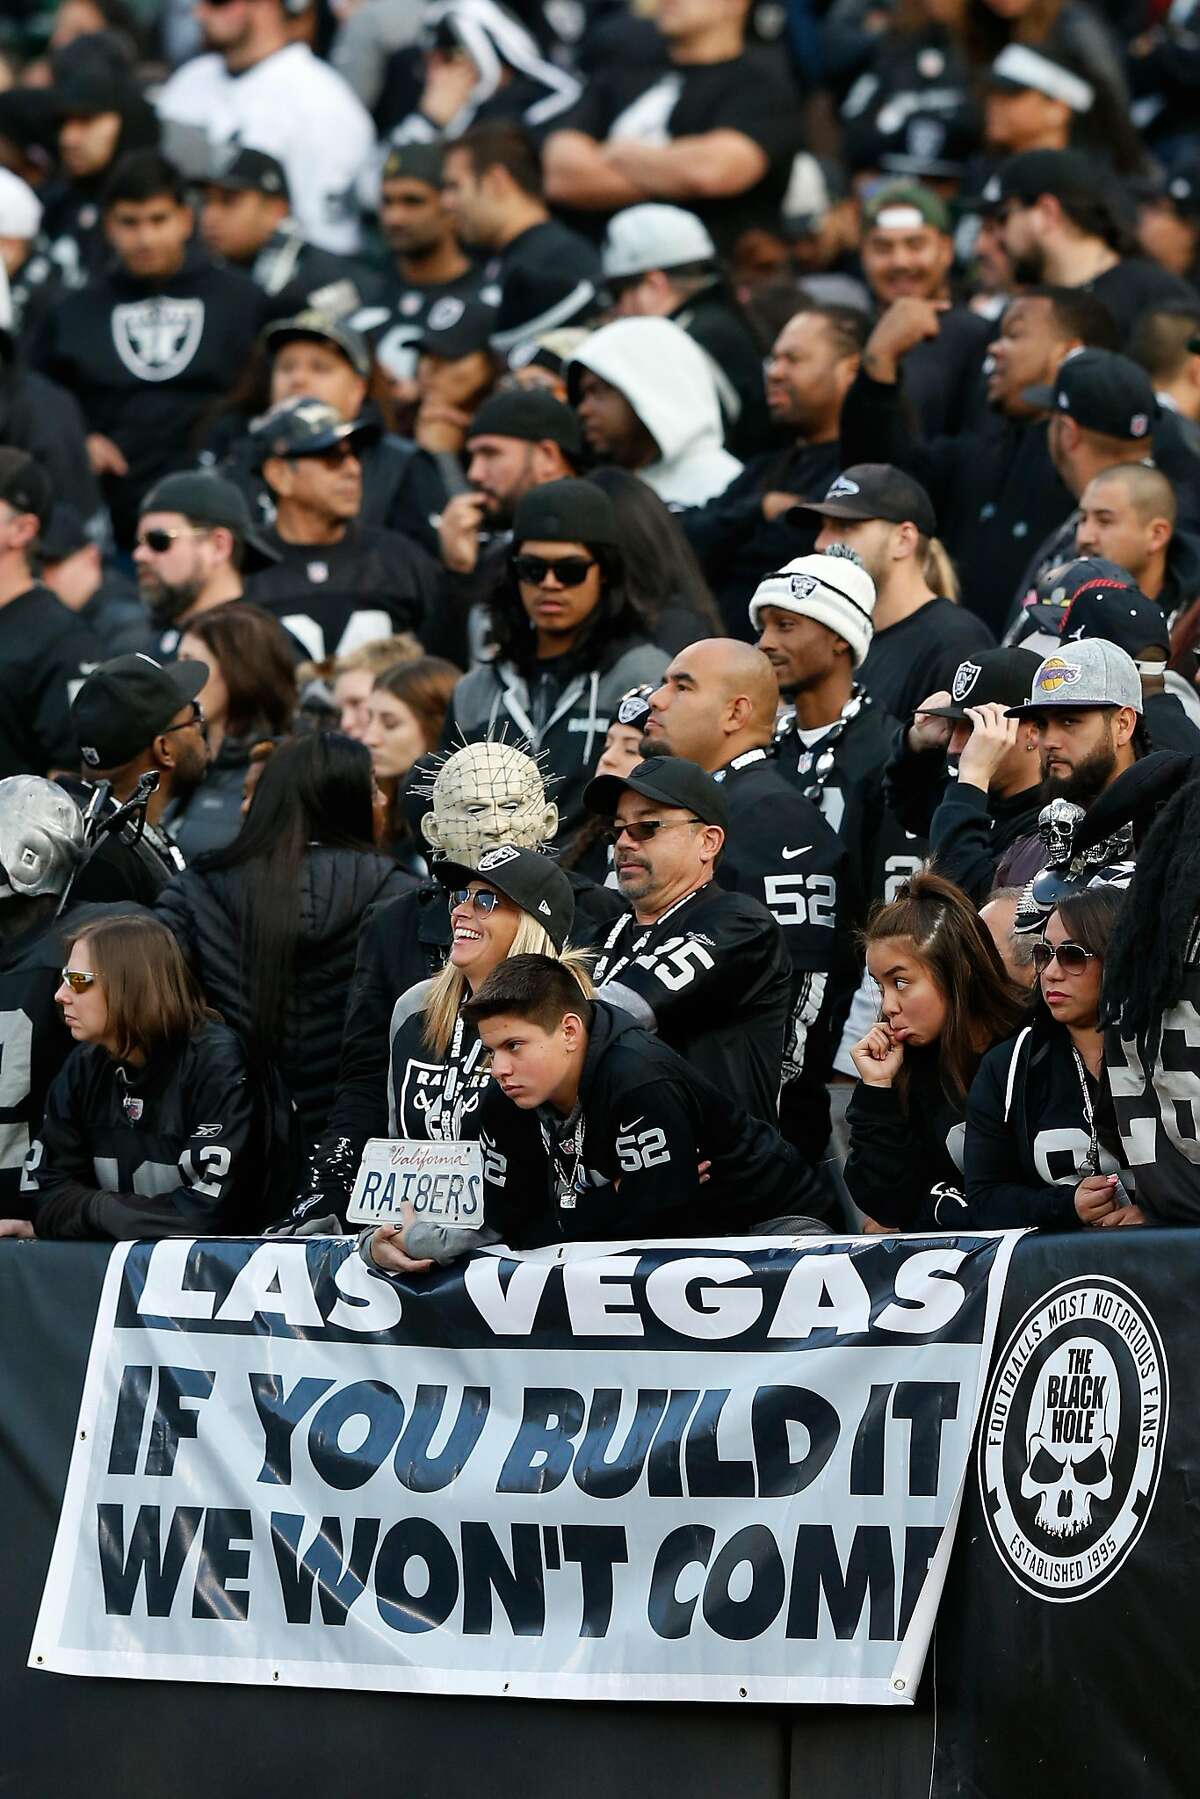 OAKLAND, CA - NOVEMBER 27: Oakland Raiders fans stand behind a sign referencing a potential move by the team to Las Vegas during their NFL game against the Carolina Panthers on November 27, 2016 in Oakland, California. (Photo by Lachlan Cunningham/Getty Images)